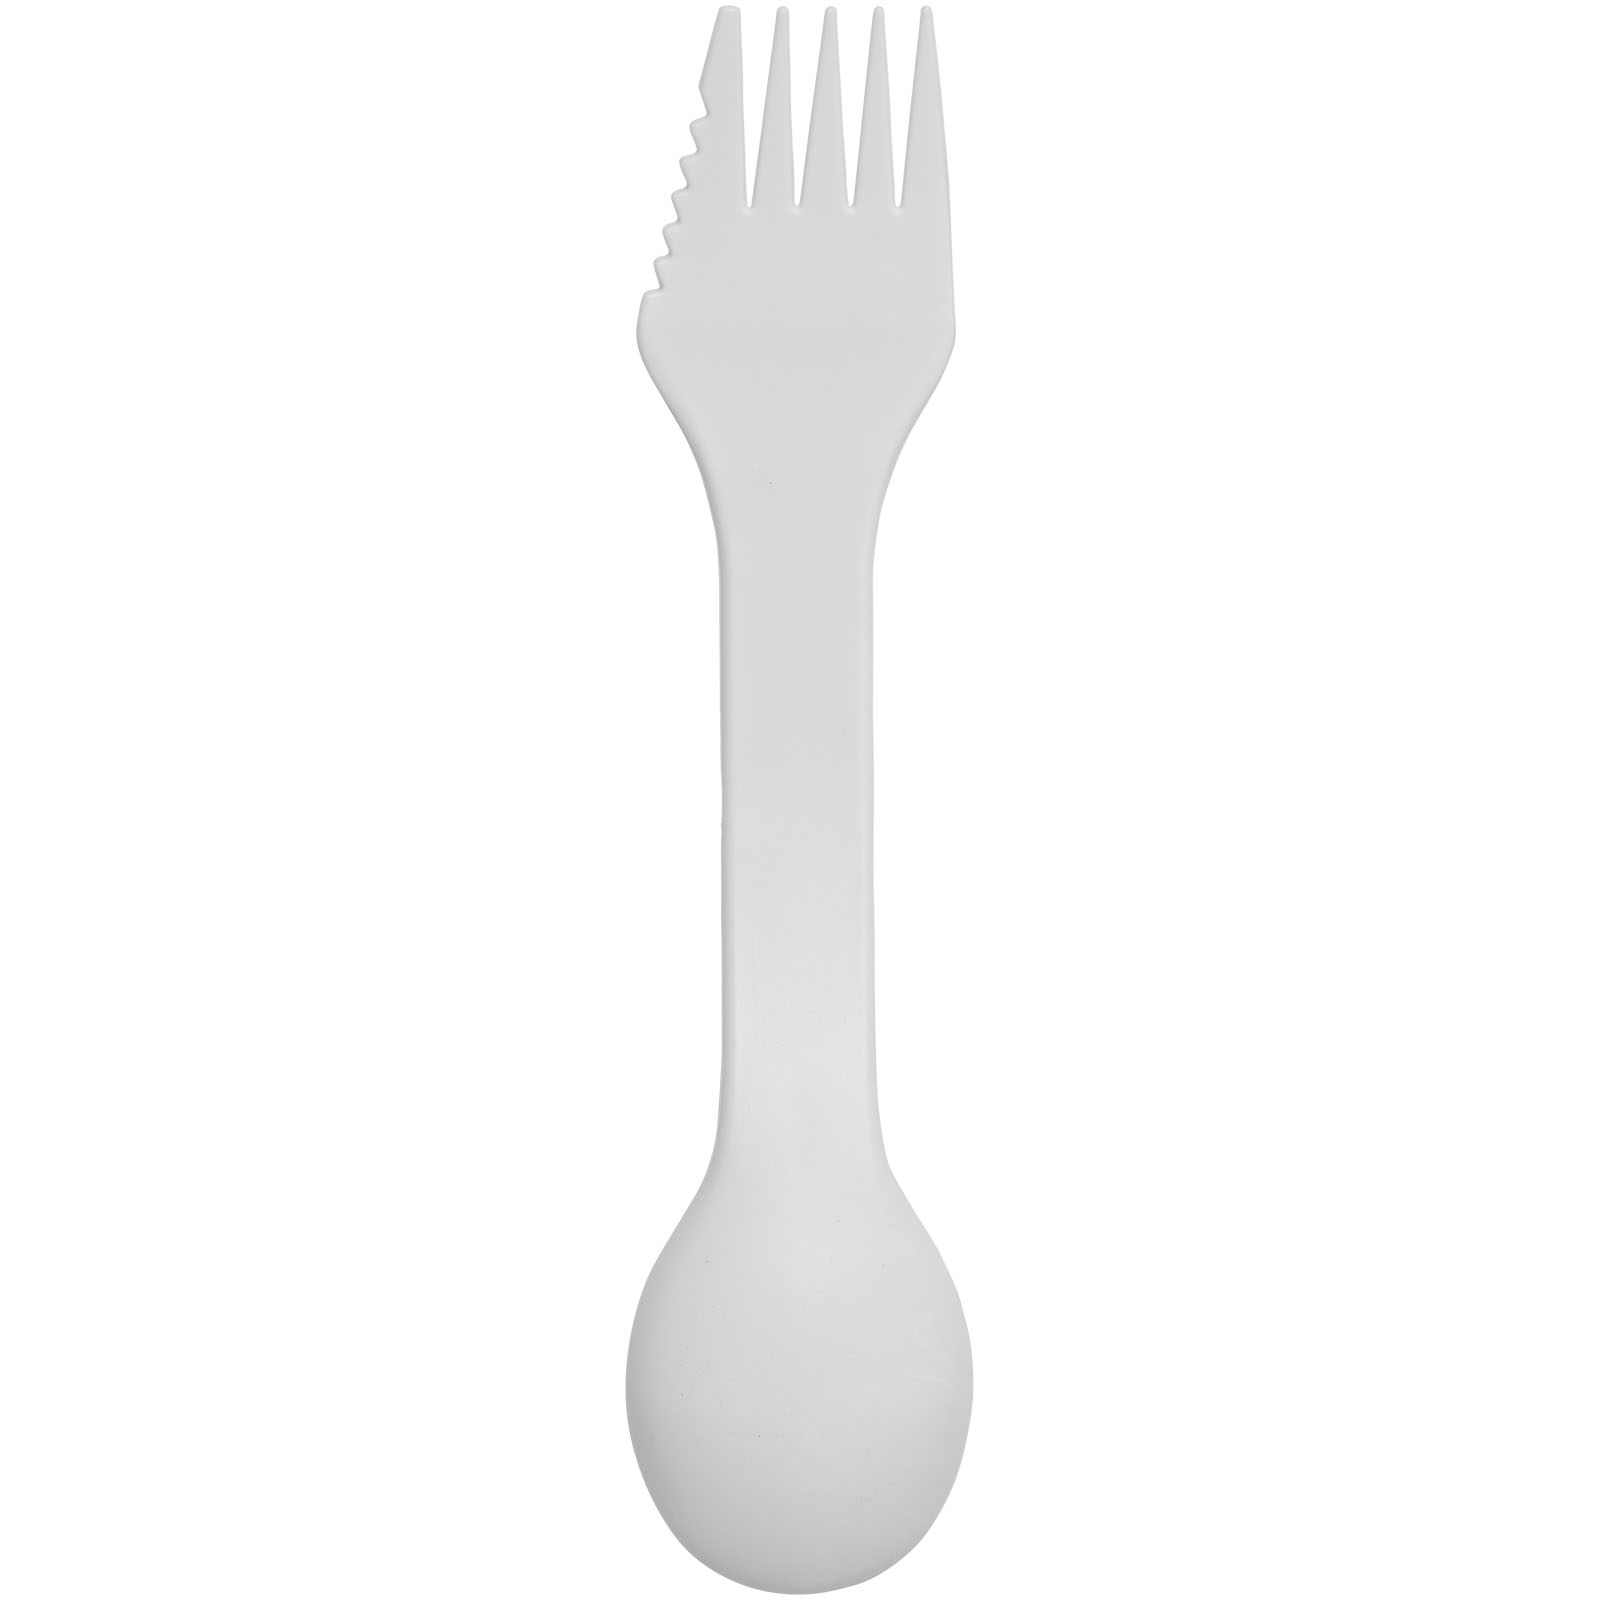 Advertising Picnic Accessories - Epsy Pure 3-in-1 spoon, fork and knife - 2